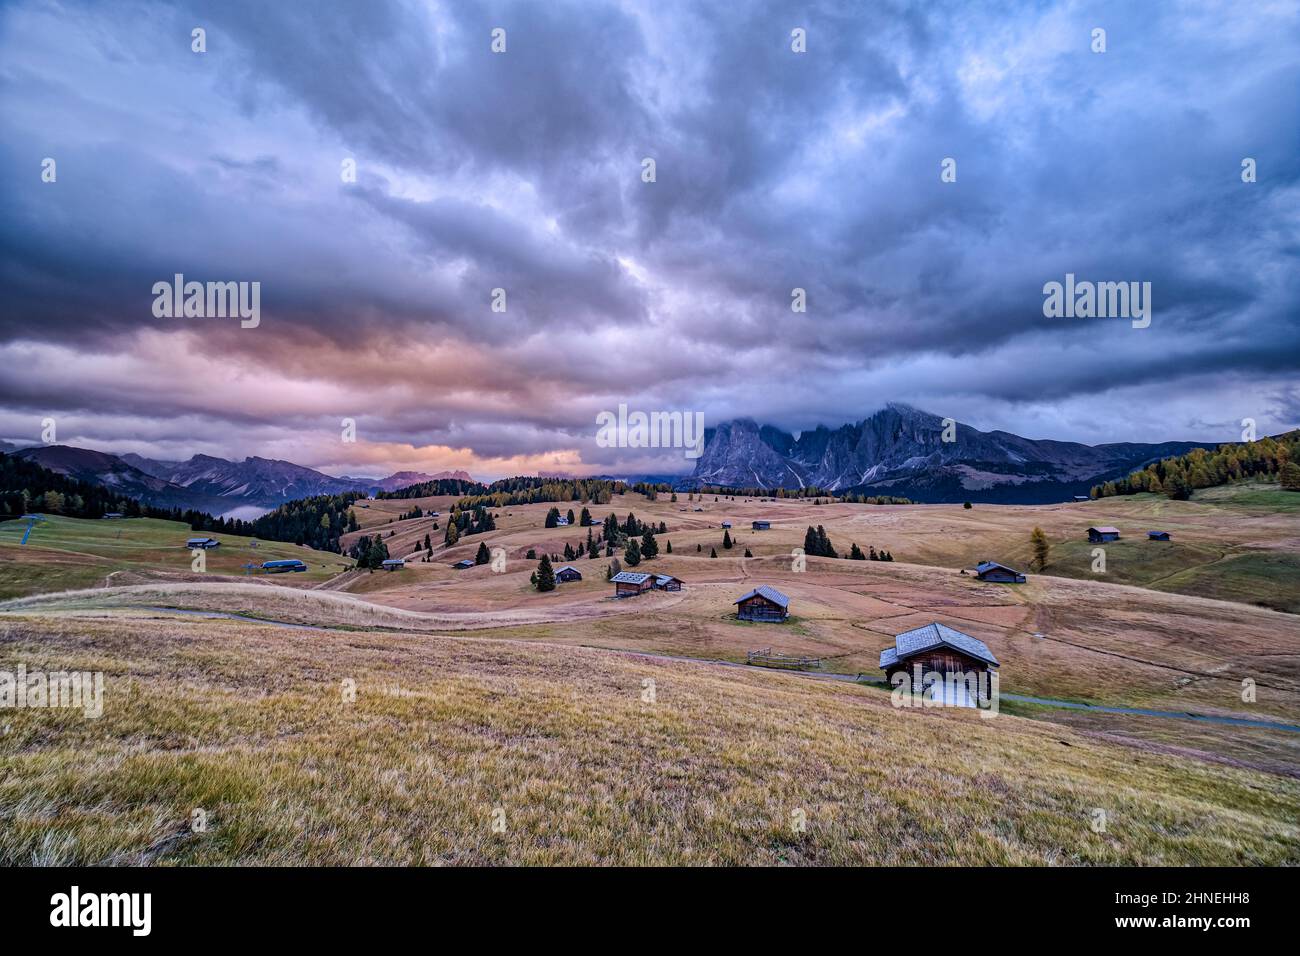 Hilly agricultural countryside with wooden huts at Seiser Alm, the mountains Langkofel (left) and Plattkofel (right) in the distance, at sunrise. Stock Photo